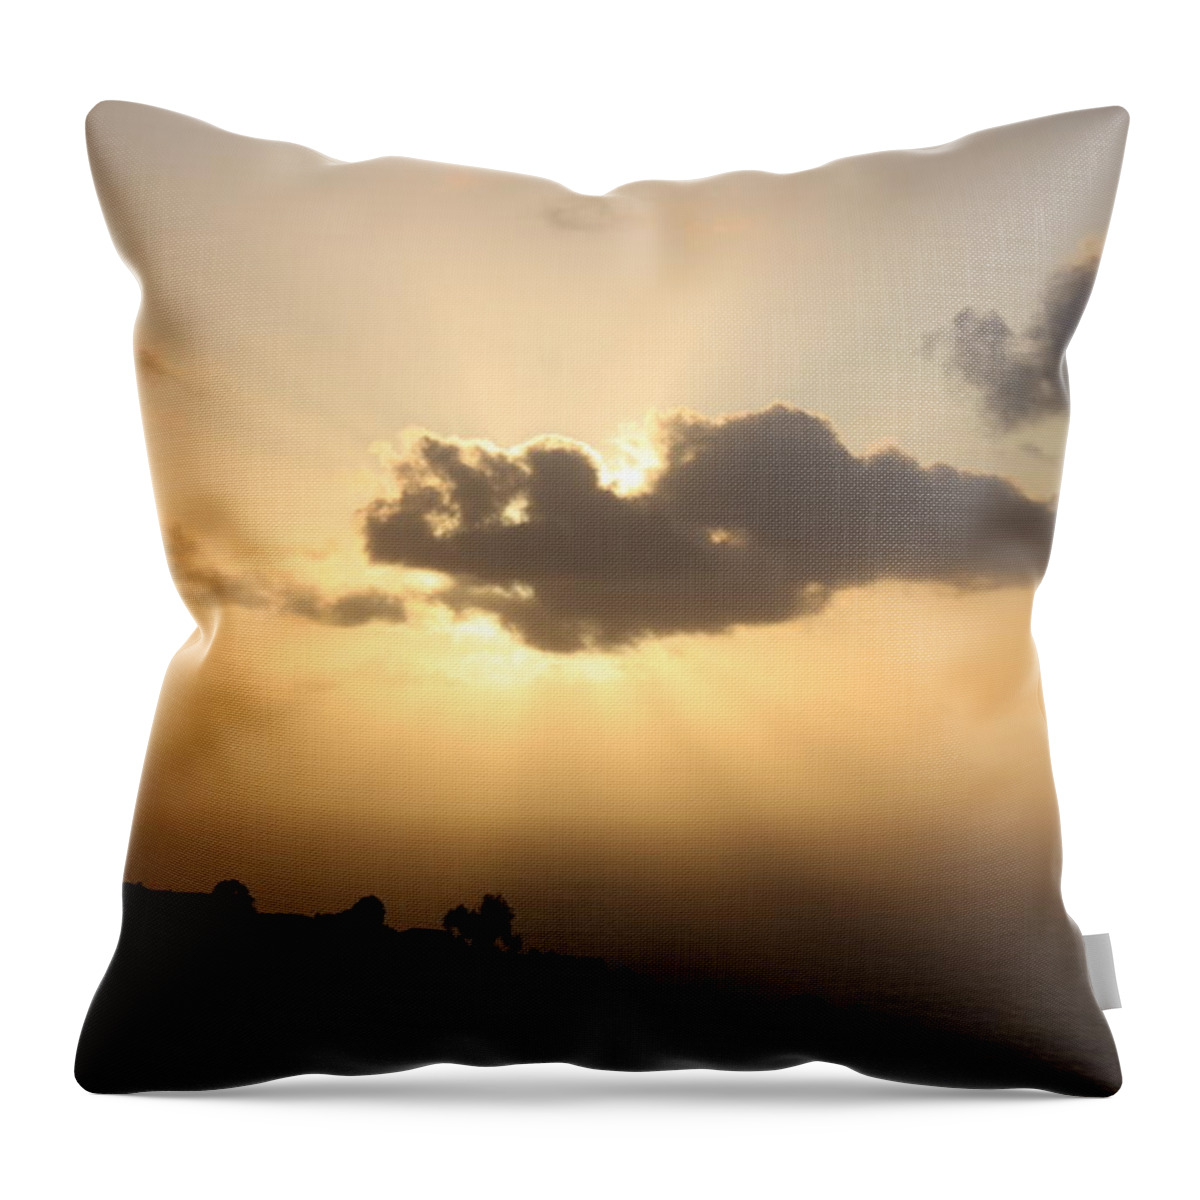 Sunset Throw Pillow featuring the photograph Radiance by Caroline Lomeli